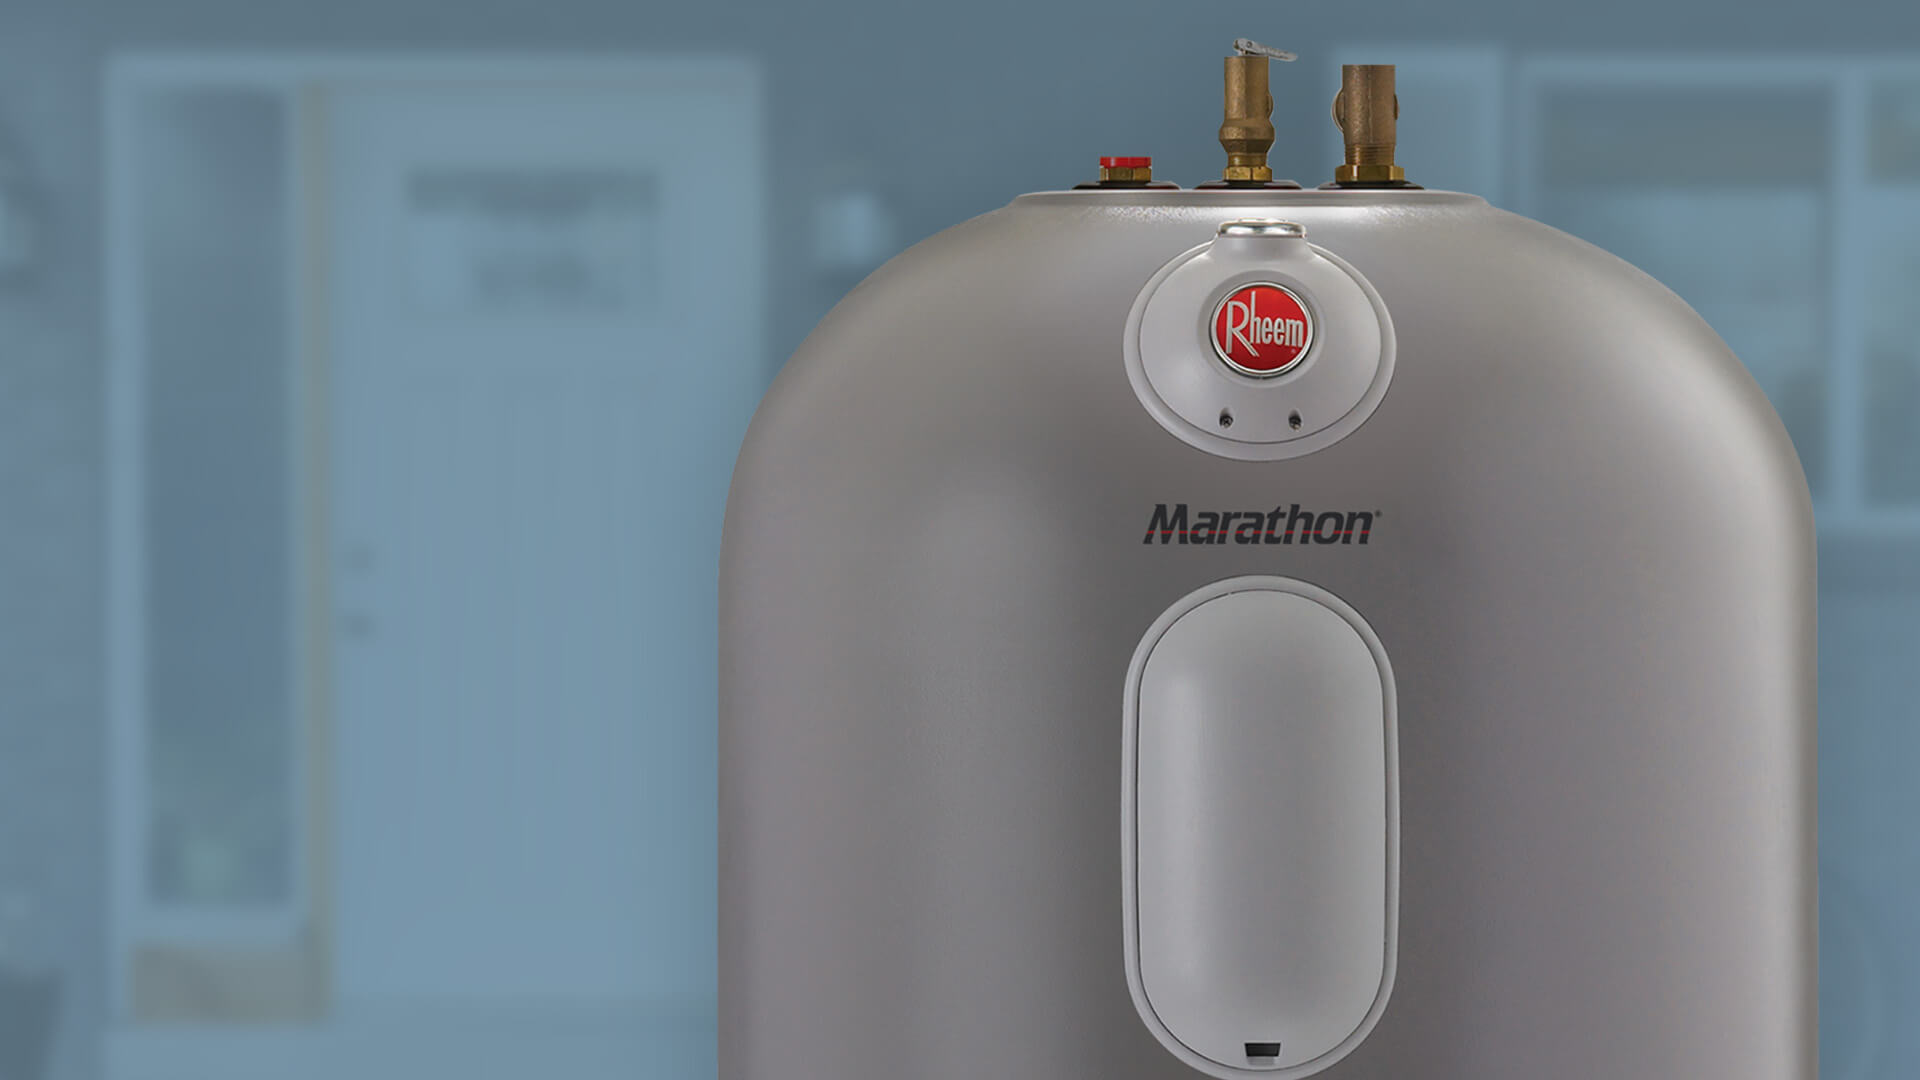 A Lifetime Of Hot Water With Marathon - Water Heating Blog - Rheem  Manufacturing Company